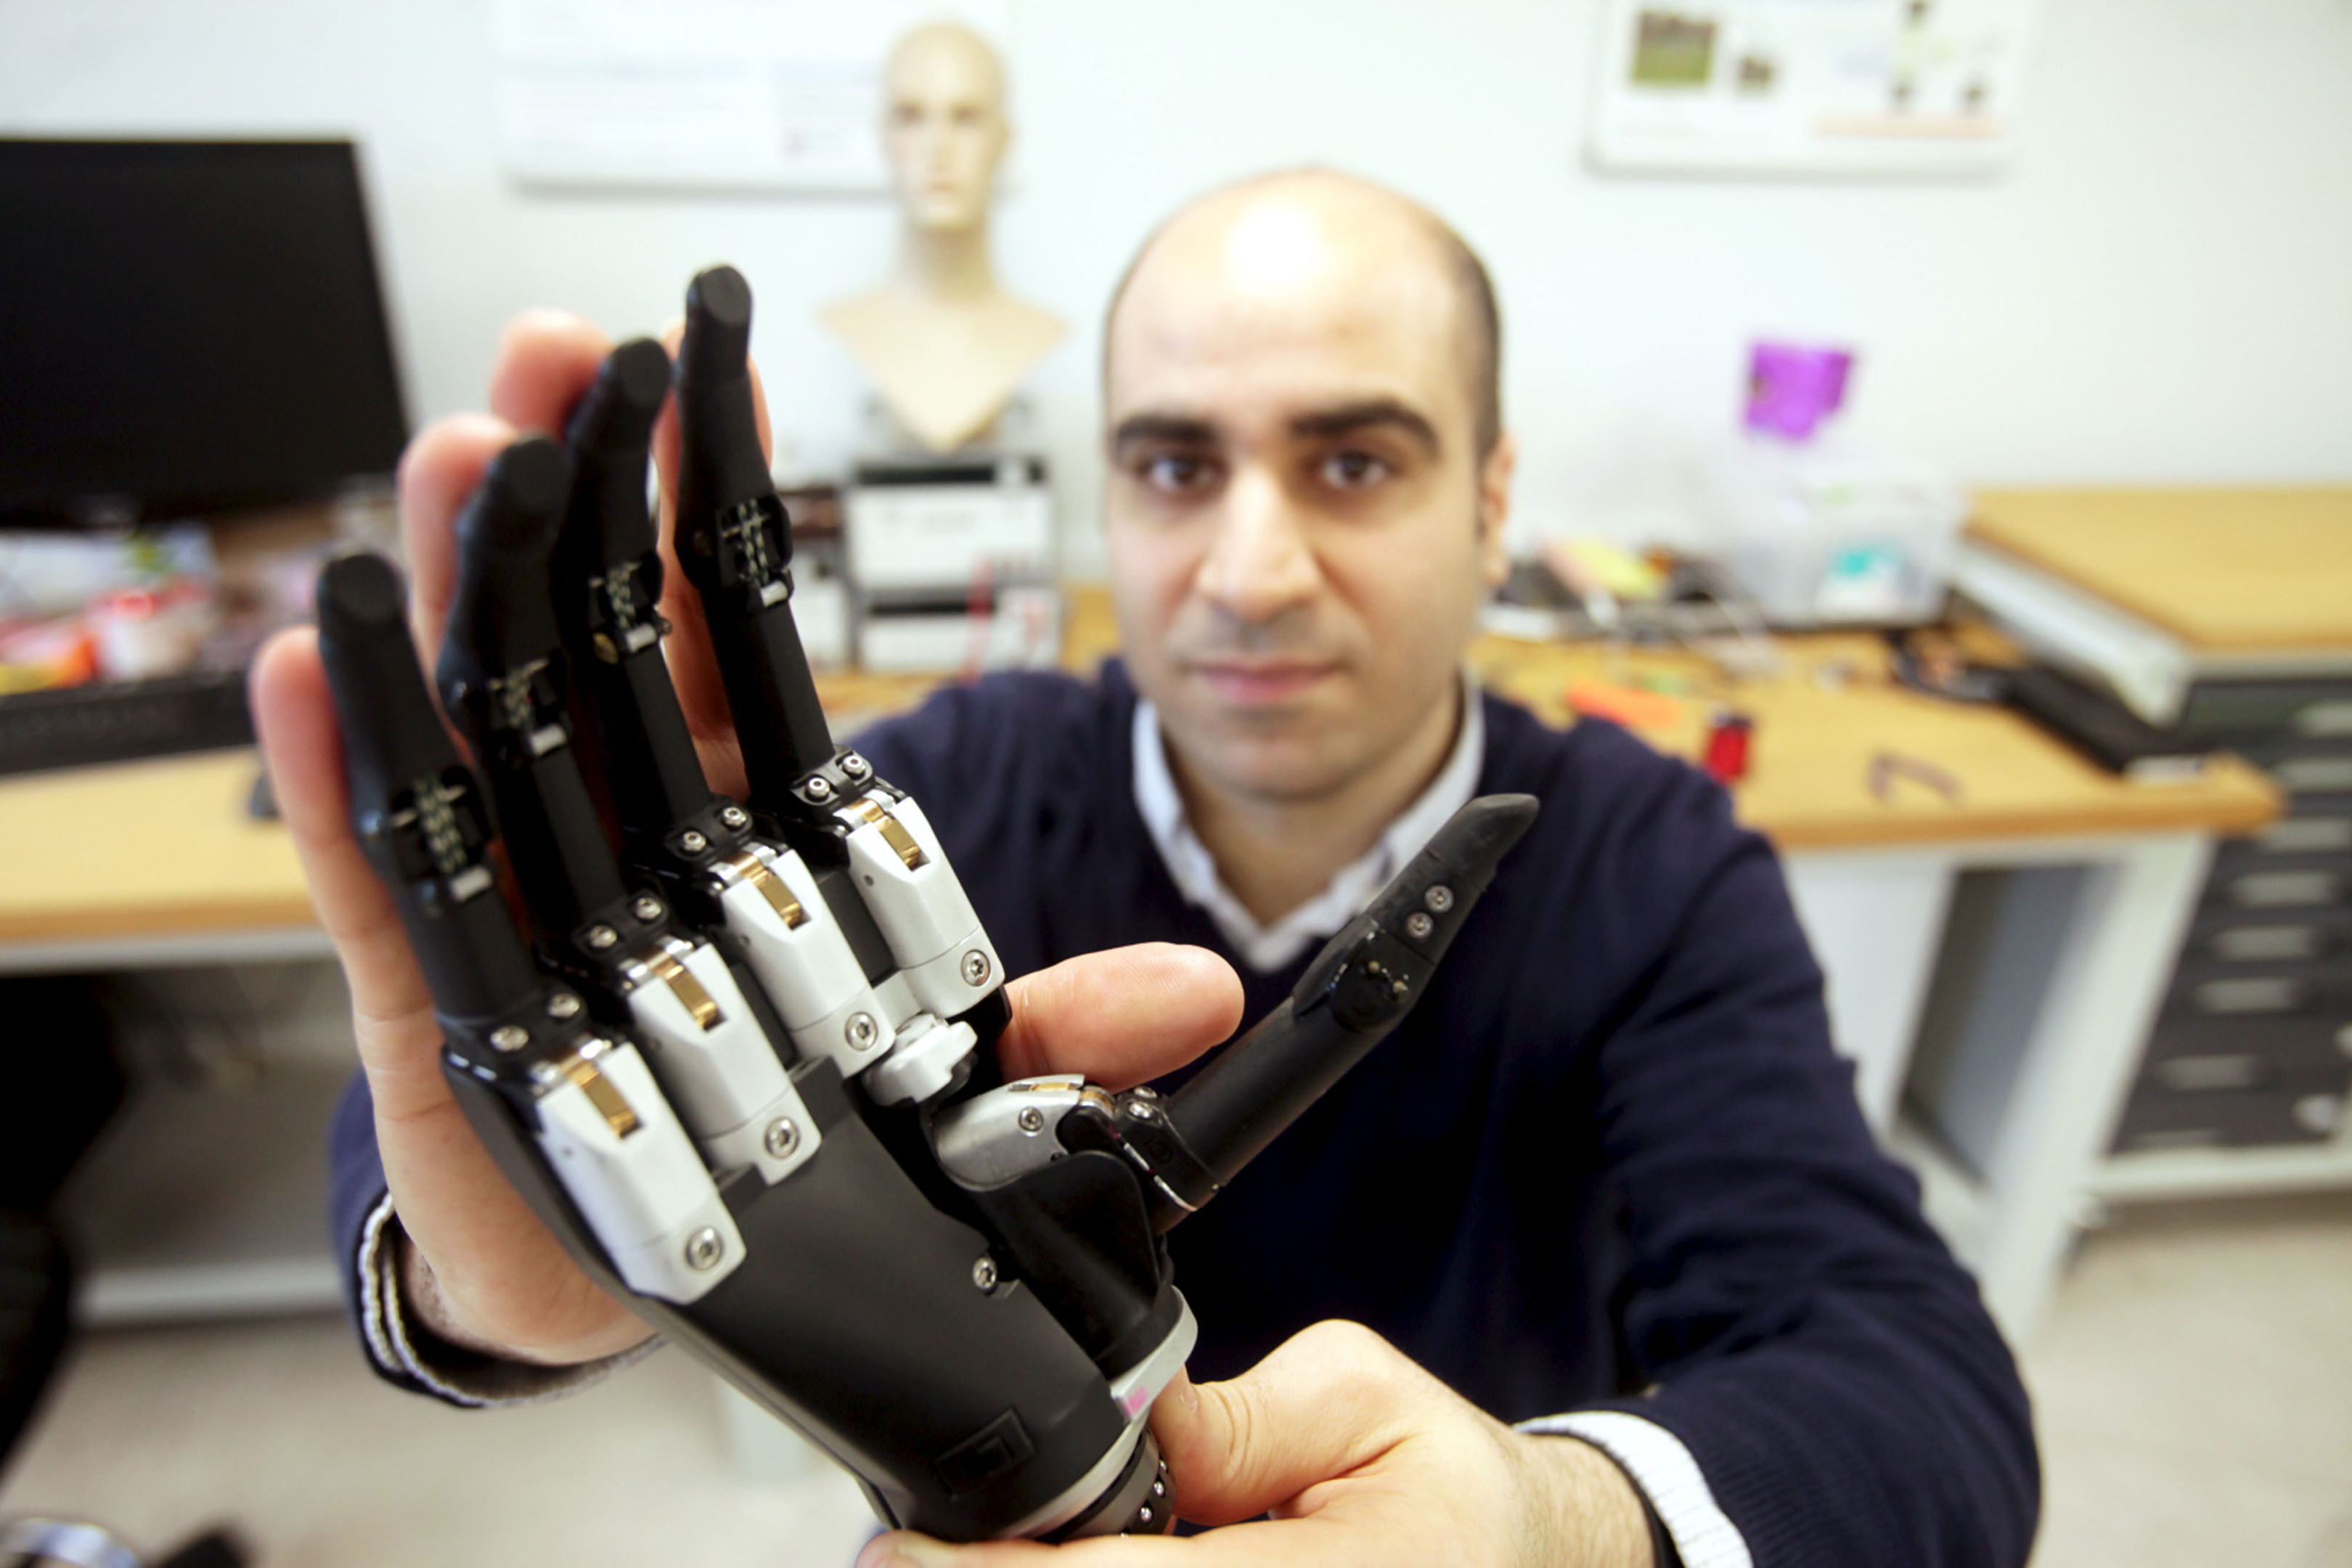 Dr. Kianoush Nazarpour from the university's Biomedical Engineering department with a new bionic hand that "sees" objects and instantly decides what kind of grip to adopt. (Mike Urwin/Newcastle University/PA Wire)